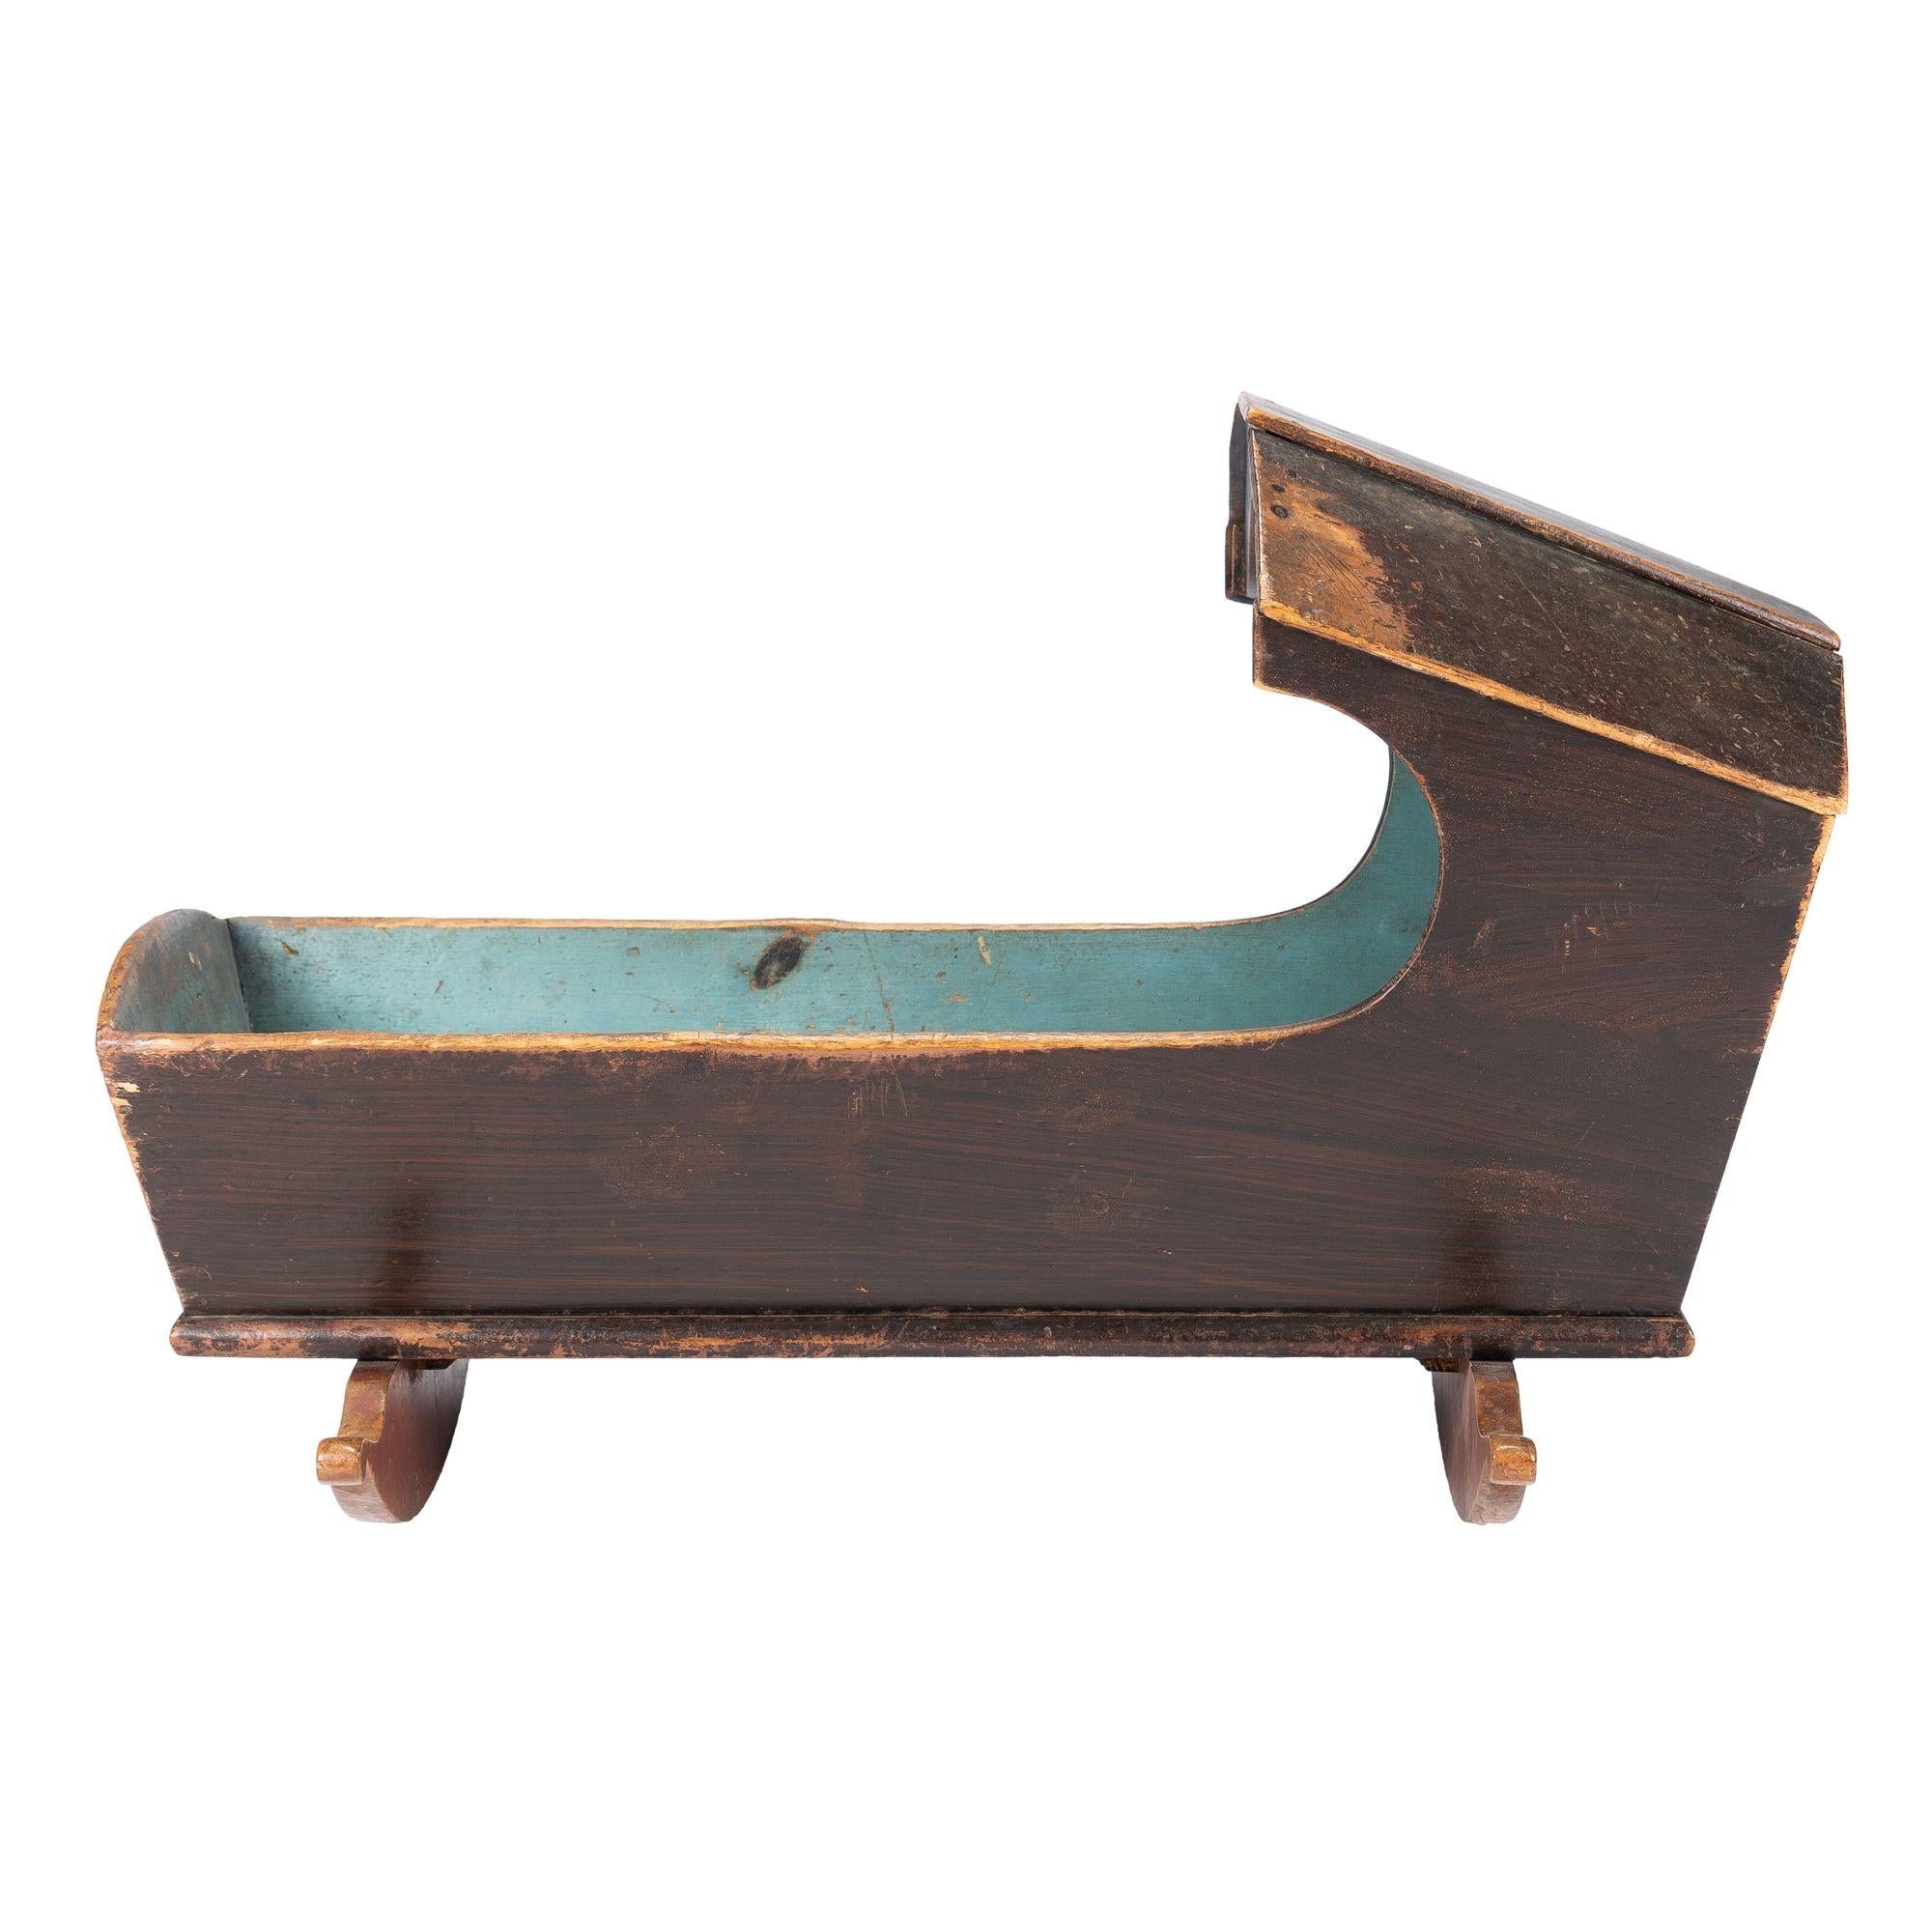 New England painted Northern white pine hooded rocking cradle. The cradle retains its original blue milk paint interior and grain painted exterior.
American, 1780-1810.